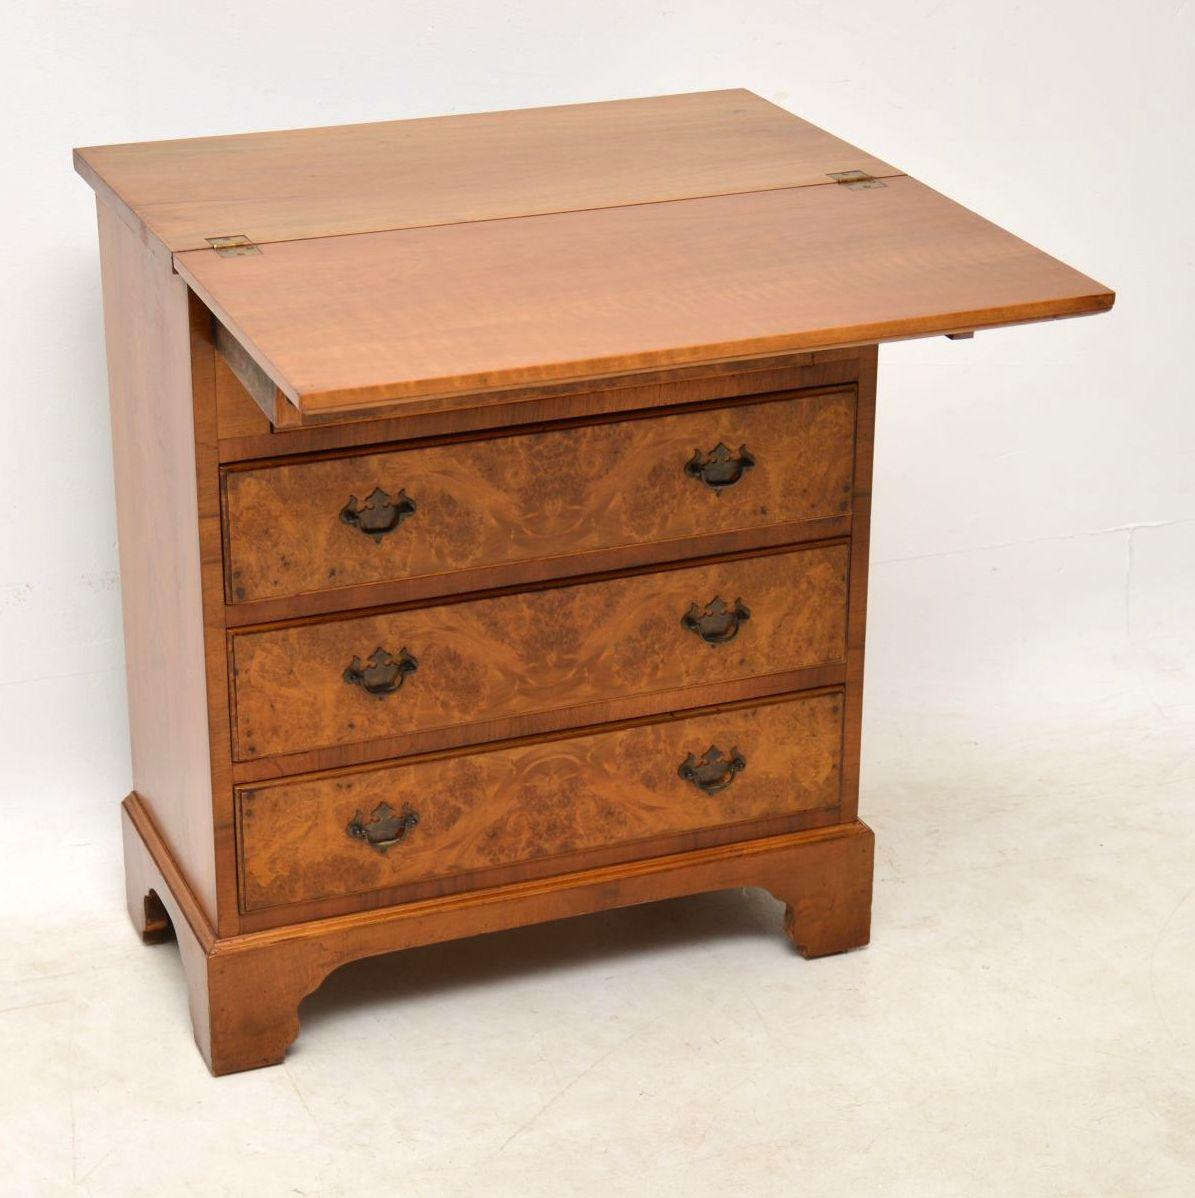 Antique burr walnut bachelors chest with a fold over top section that’s supported by two pull-out loafers. This chest has beautifully patterned burr walnut veneers, original brass handles and sits on bracket feet. This chest of drawers date from